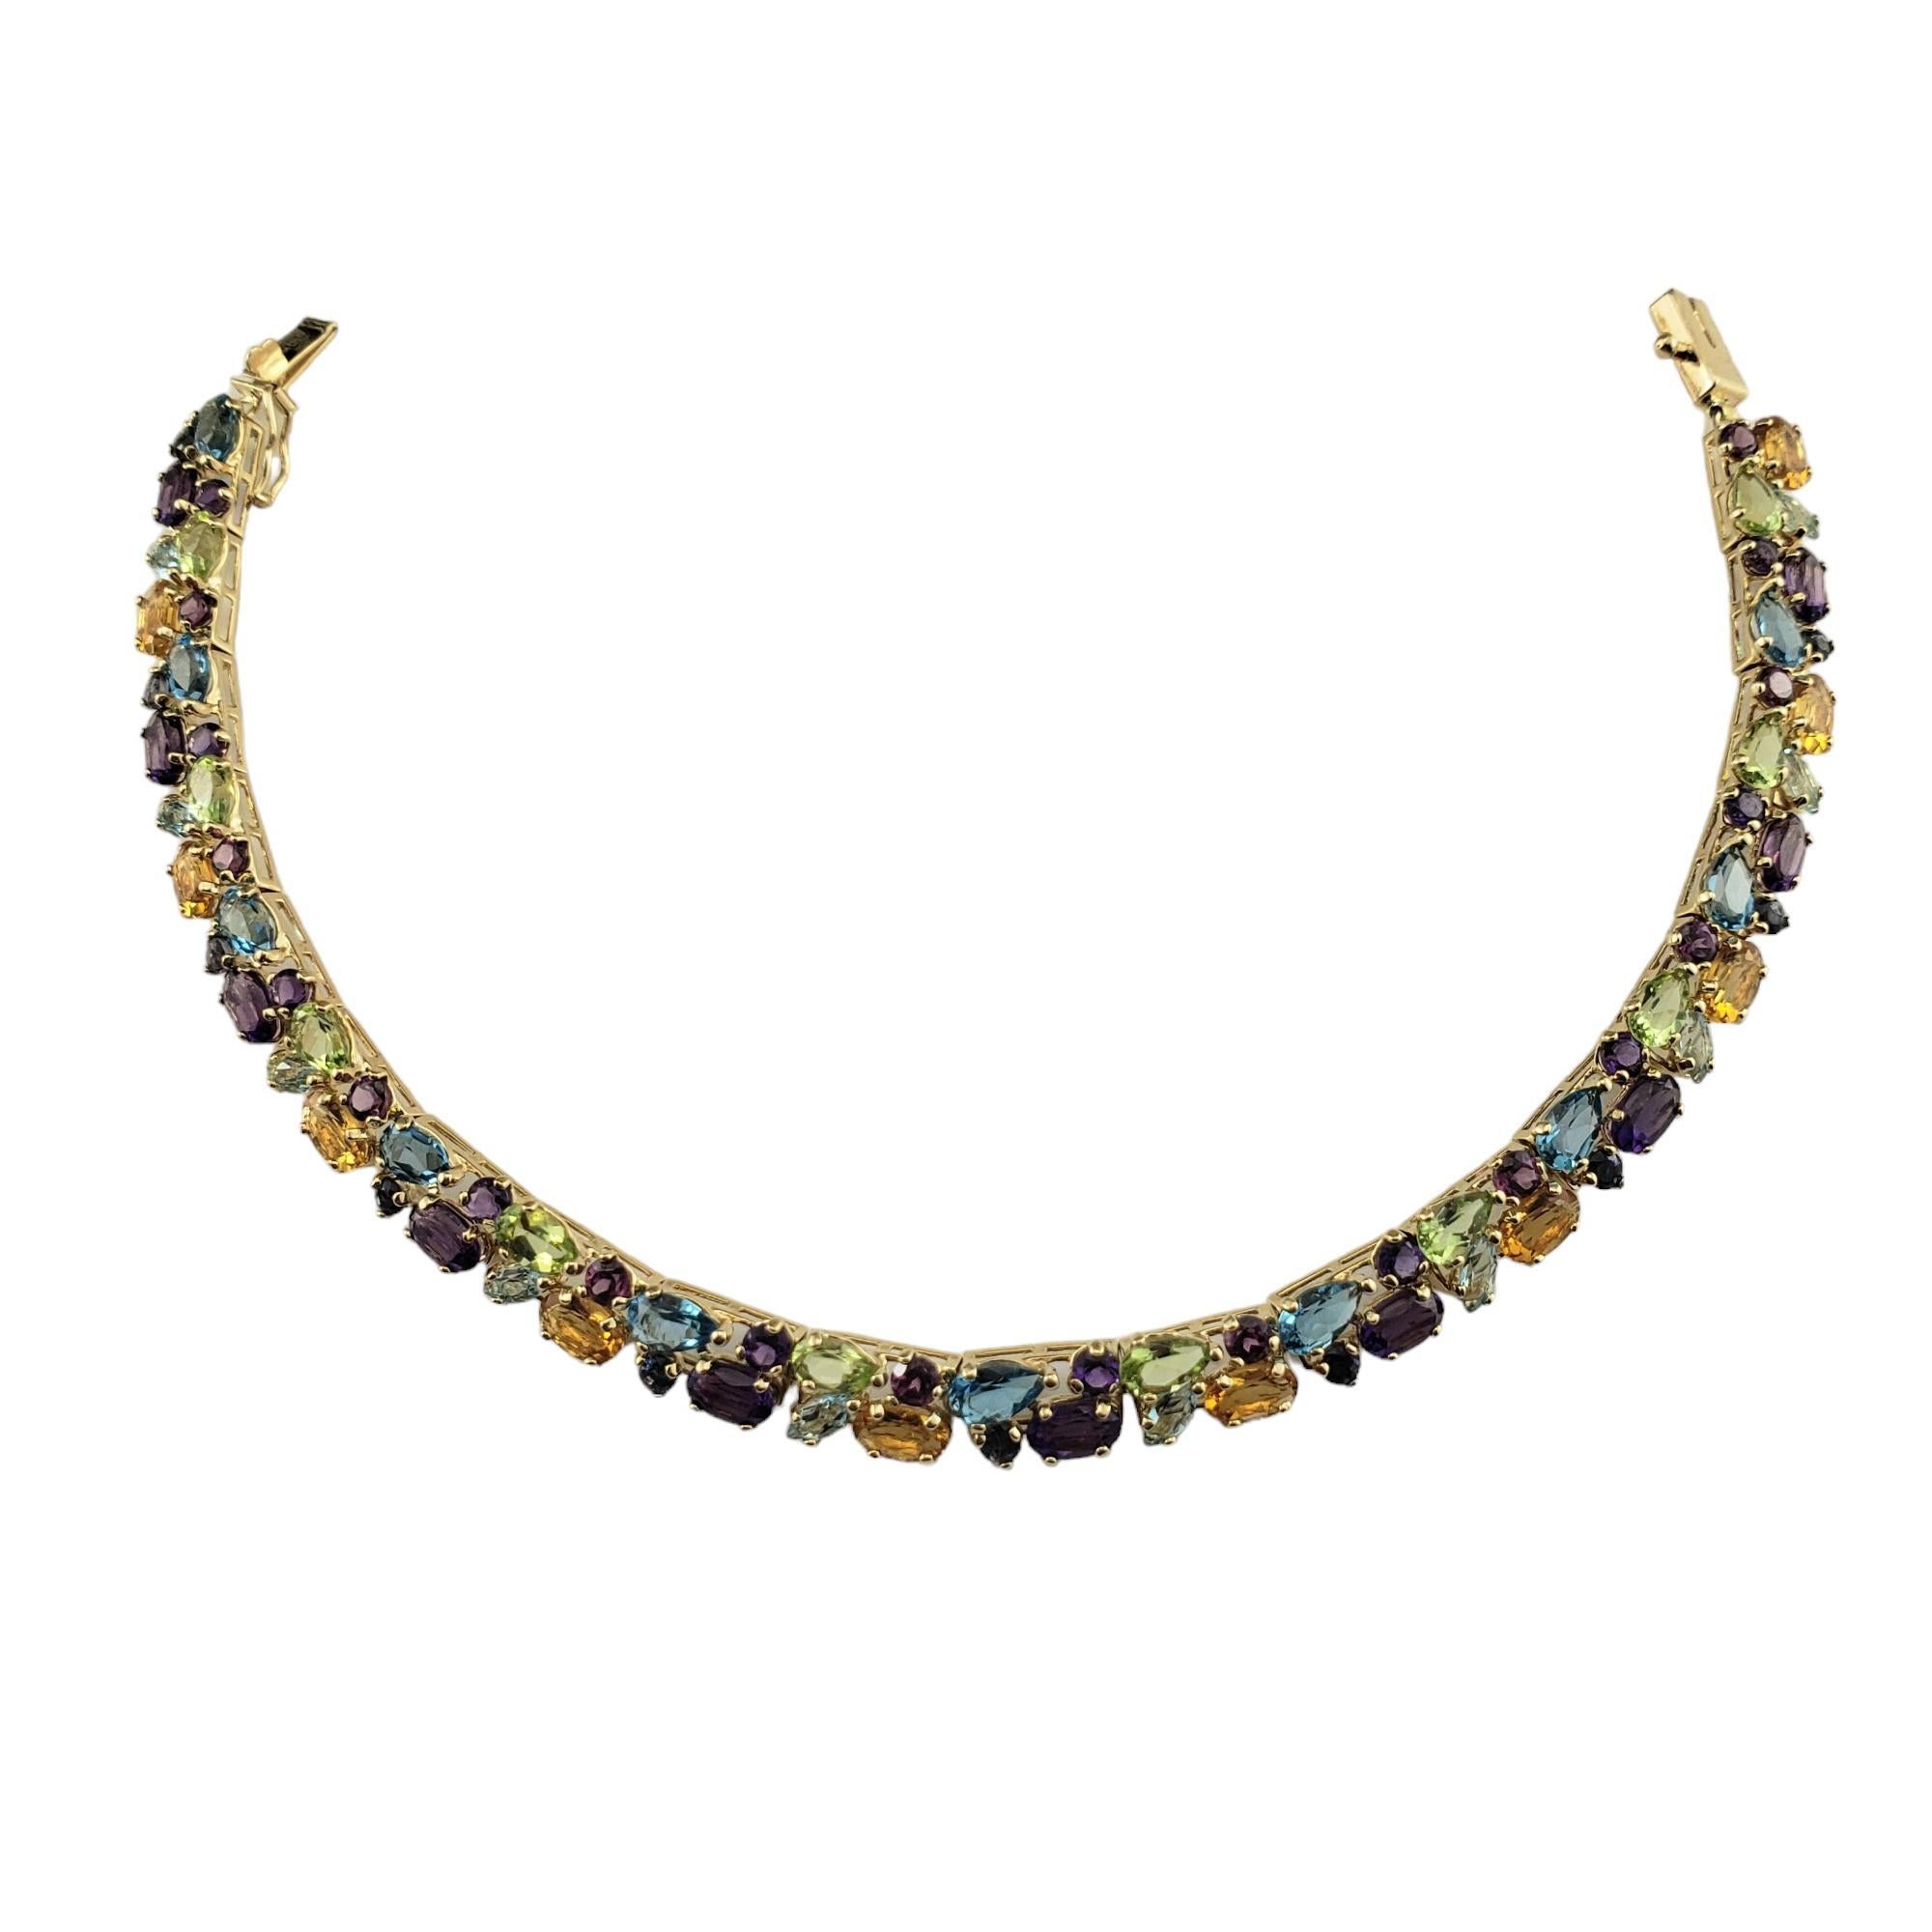 Vintage 14K Yellow Gold Gemstone Bracelet 

This stunning bracelet features 20 blue topaz, 20 amethysts, 10 peridots, 10 citrines, 10 garnets, and 10 blue sapphires set in classic 14K yellow gold.  Width: 6 mm.

Total topaz weight: 3.30 ct.

Total